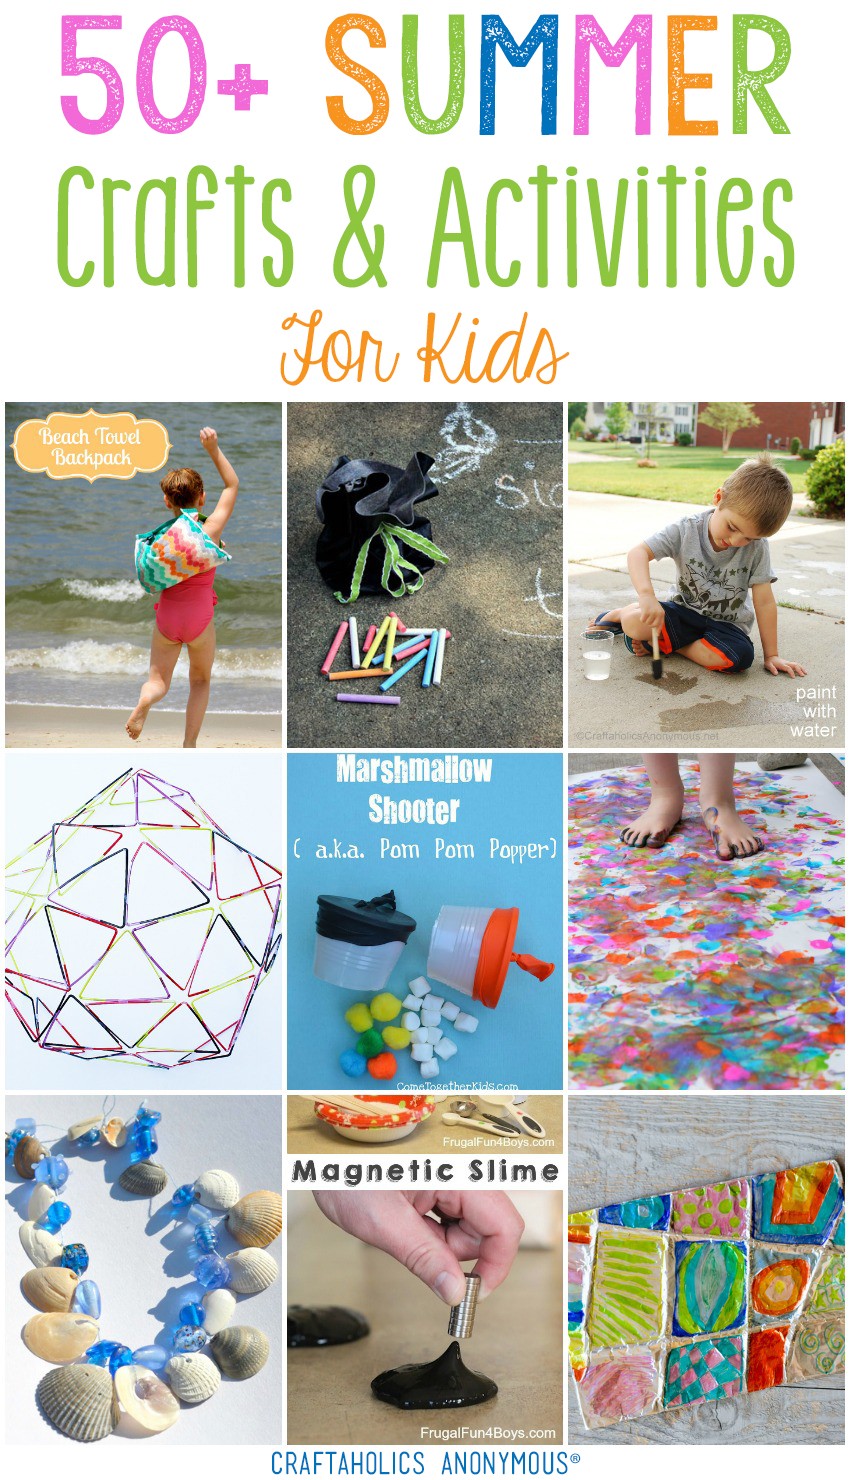 50+ Summer Crafts for Kids | Craftaholics Anonymous®